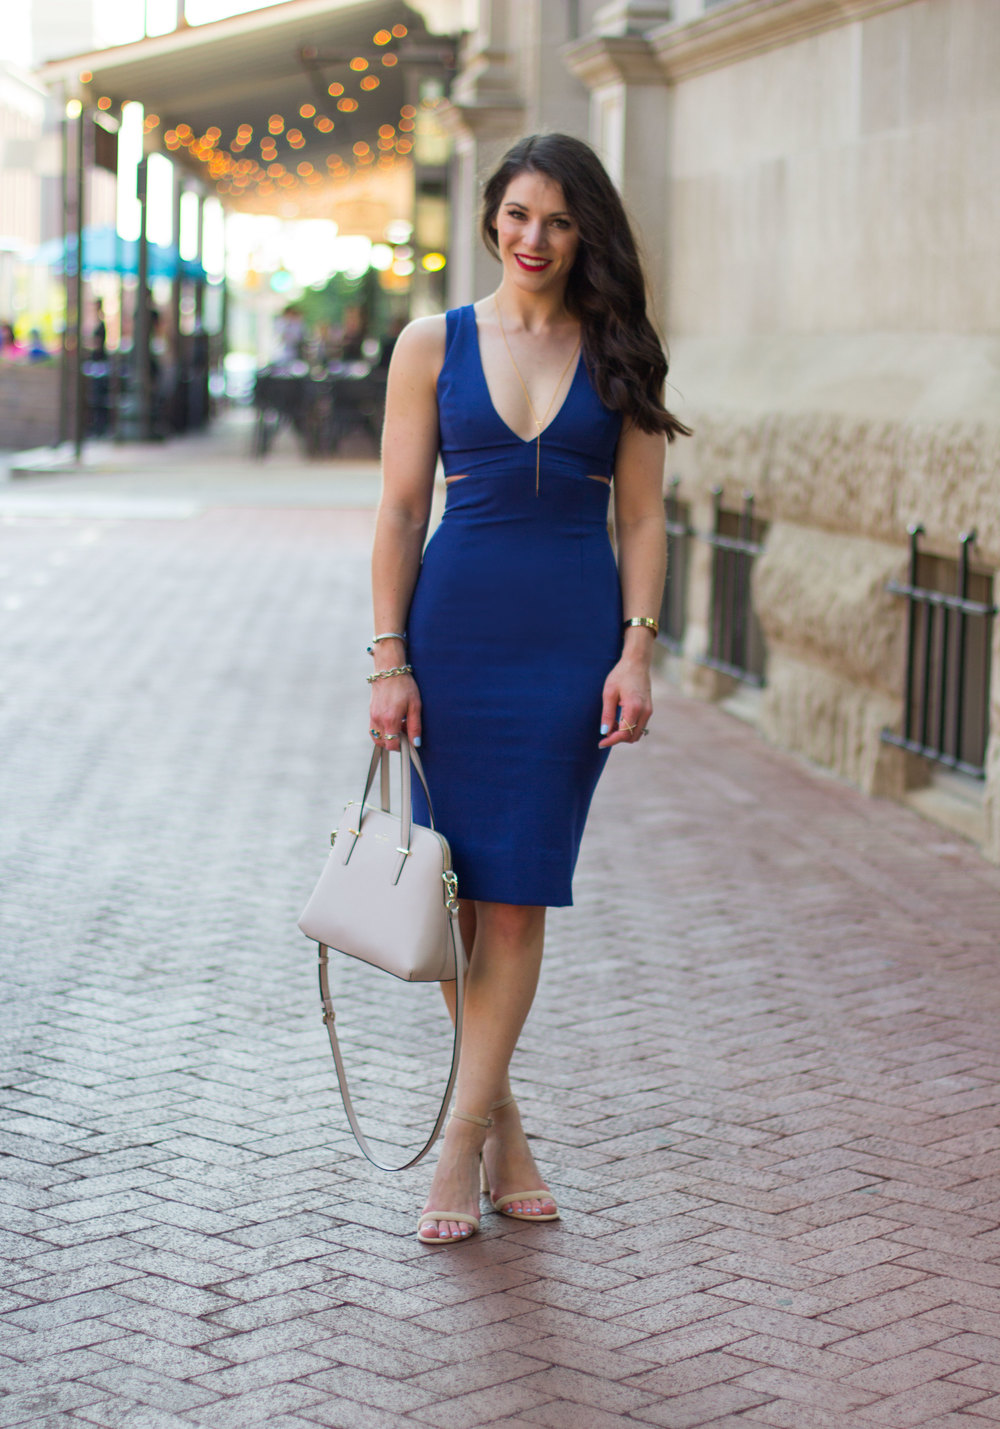 Wear to dresses to wedding bodycon a